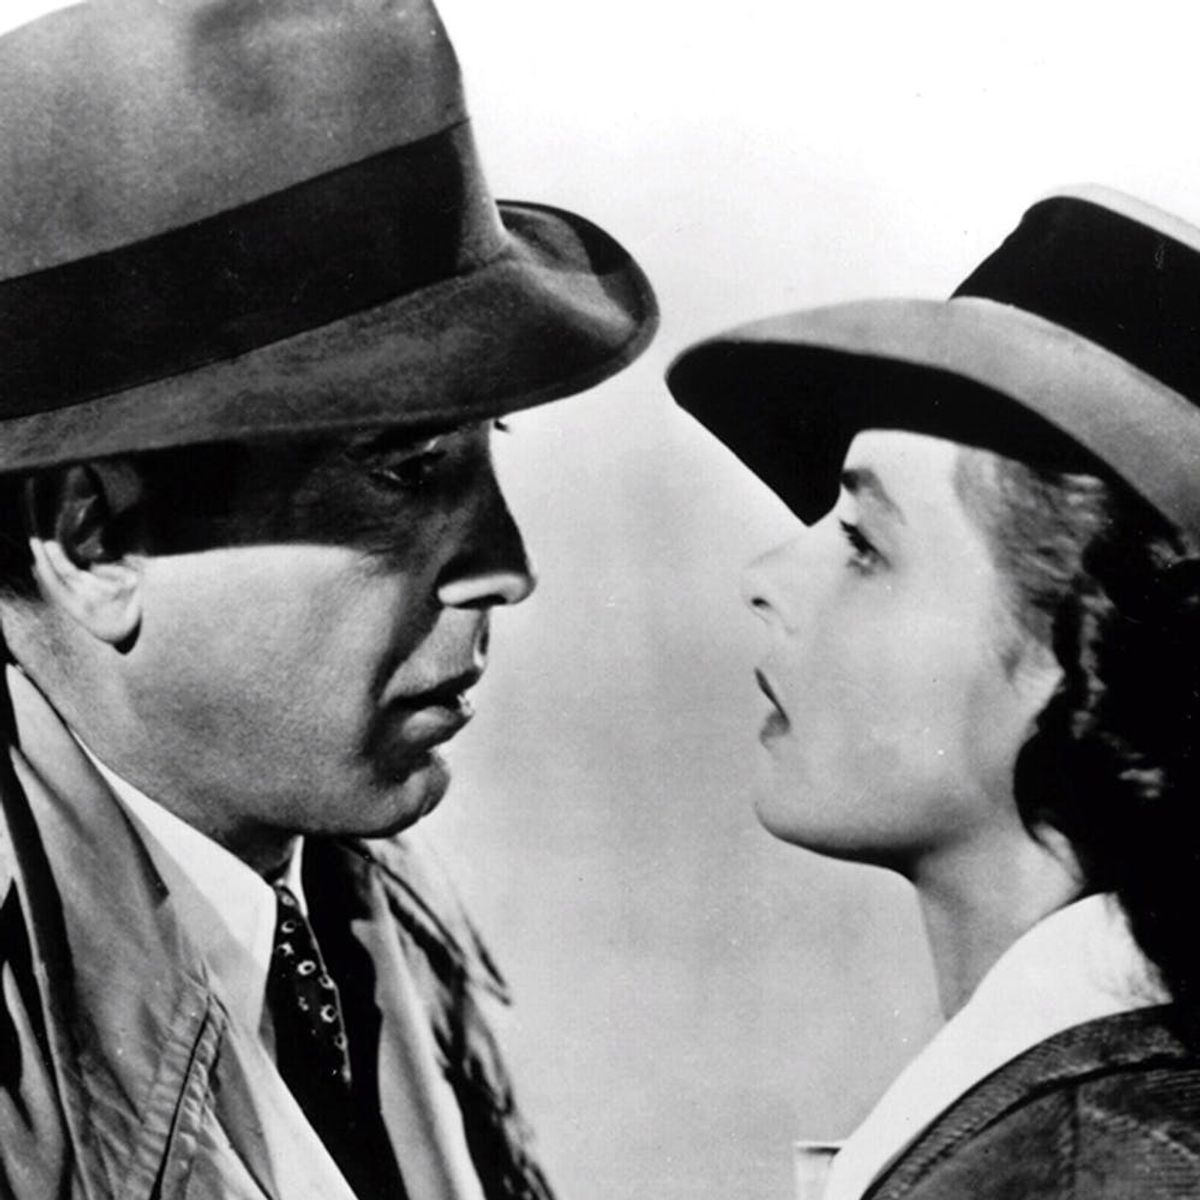 Why This Clip from Casablanca Is Being Shared in the Wake of the Paris Attacks